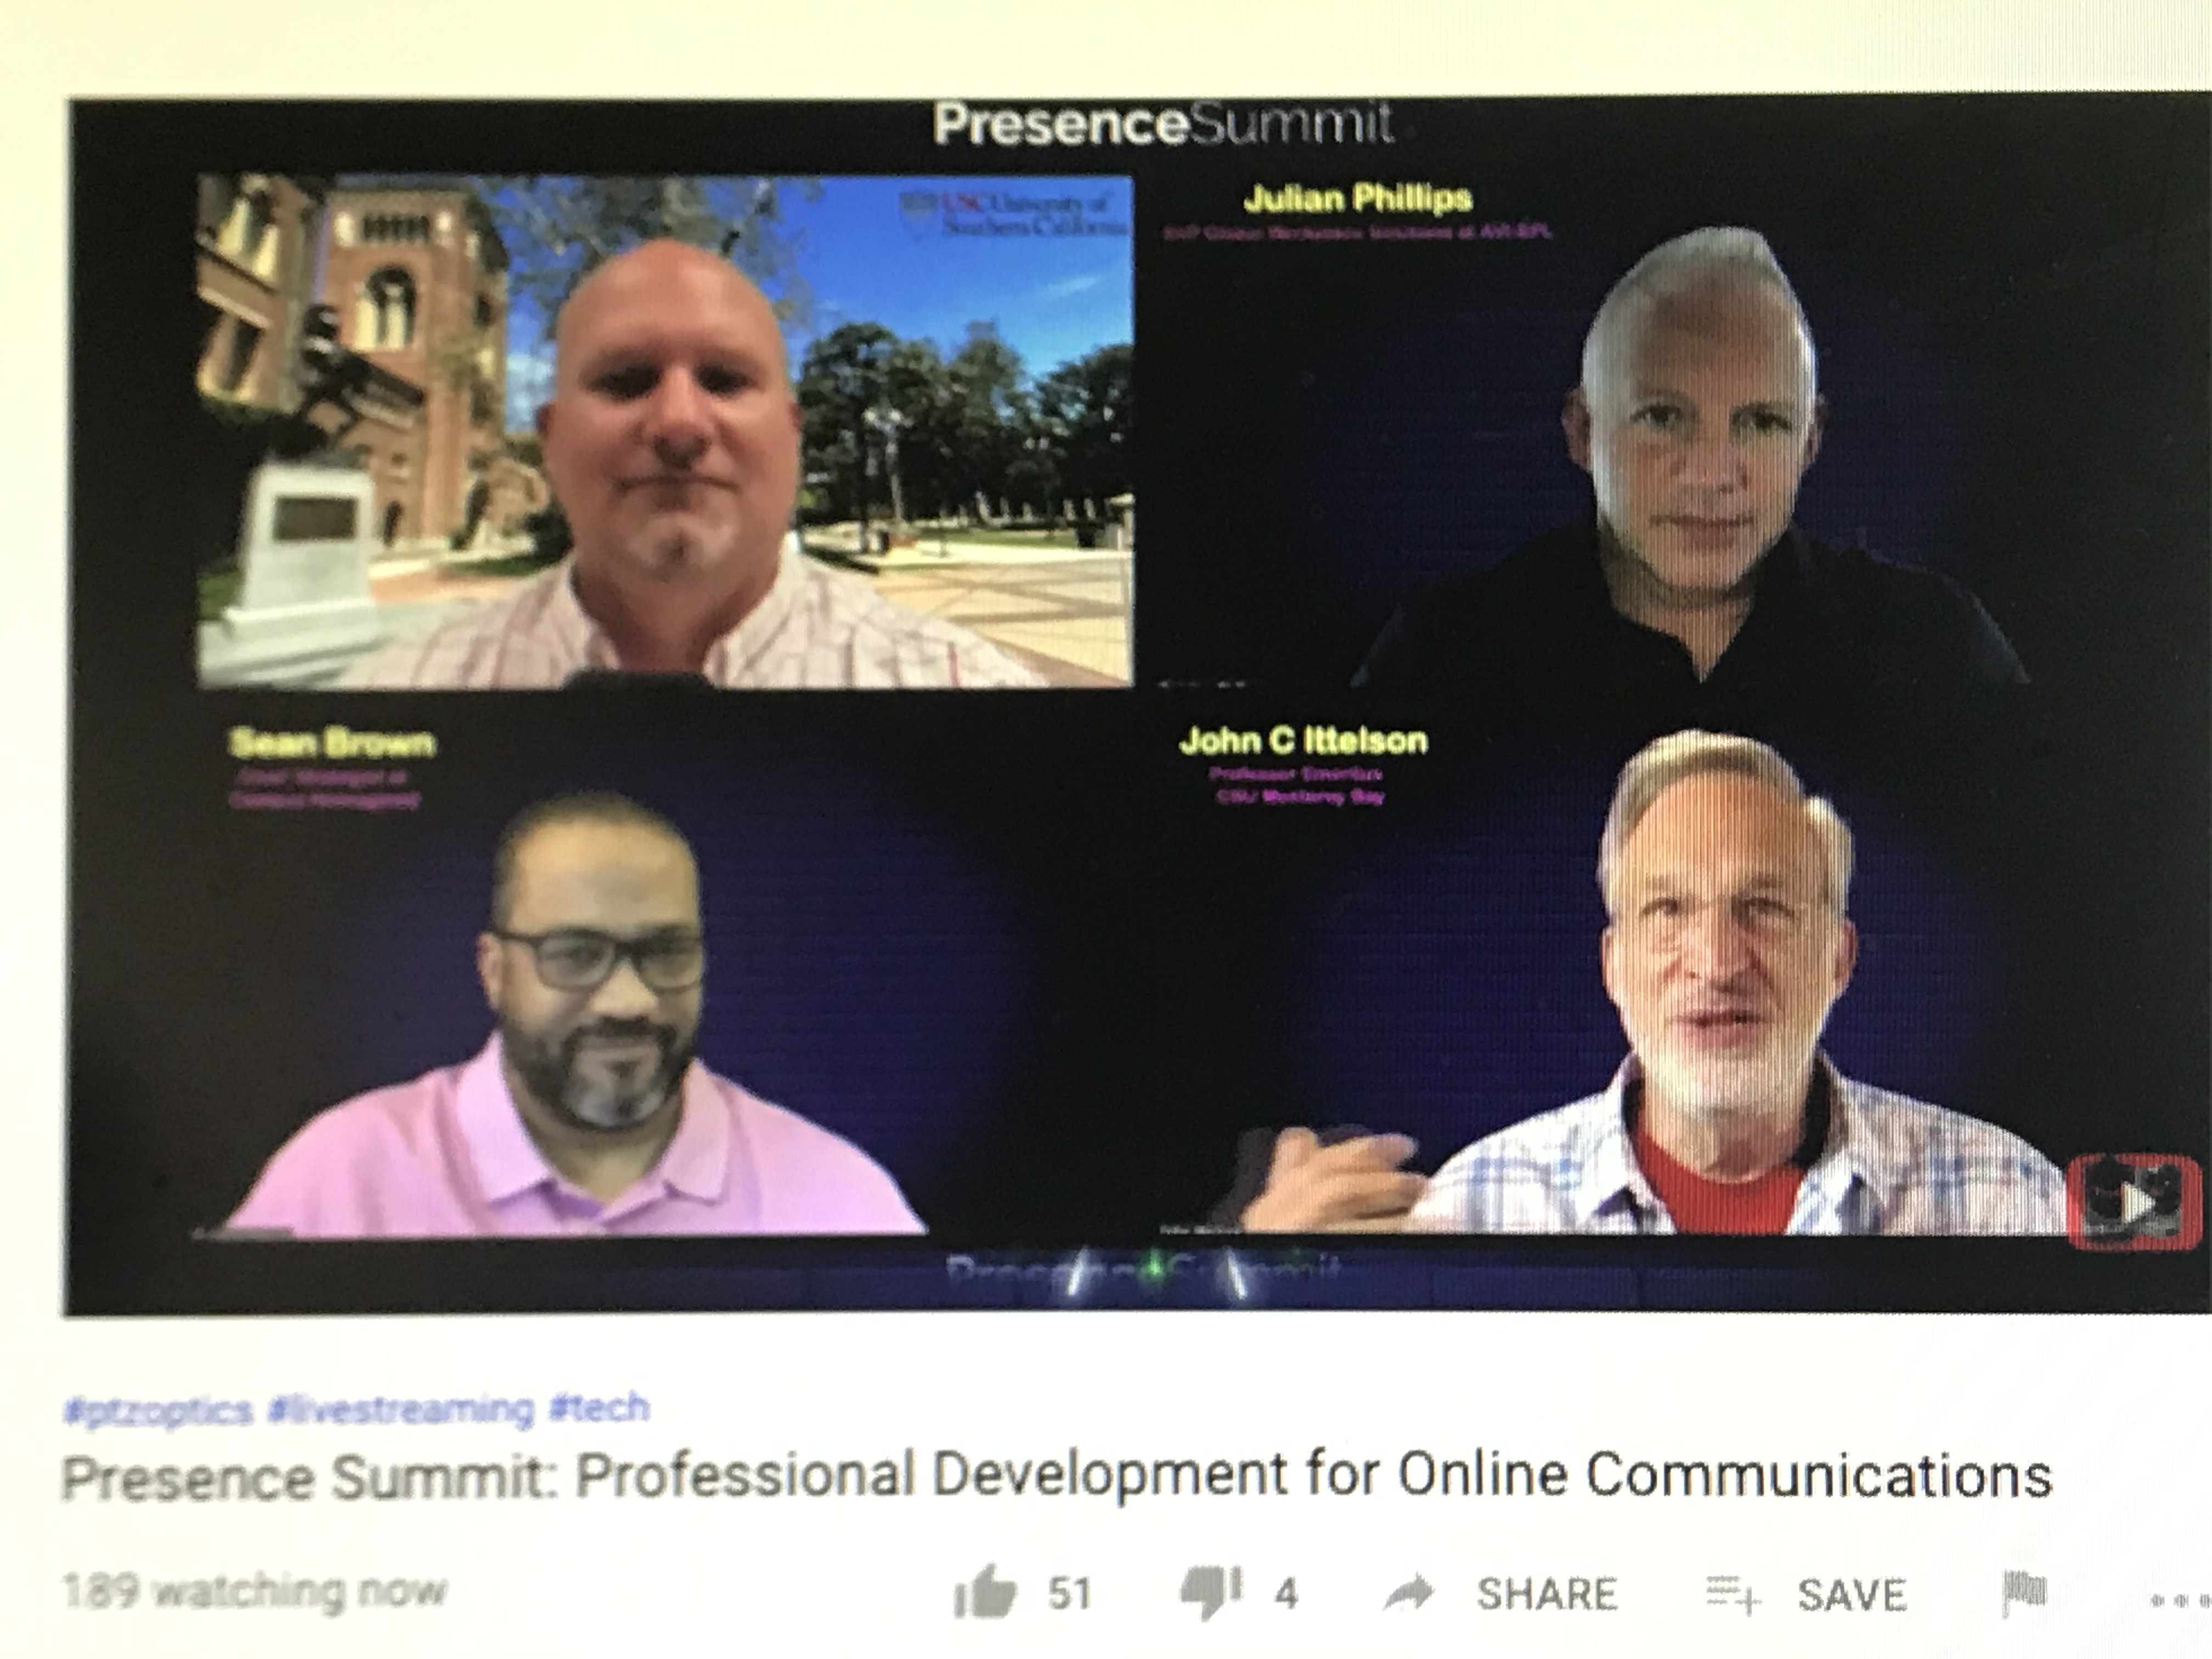 Unified communications within higher ed was the focus on a panel session from the Presence Summit.